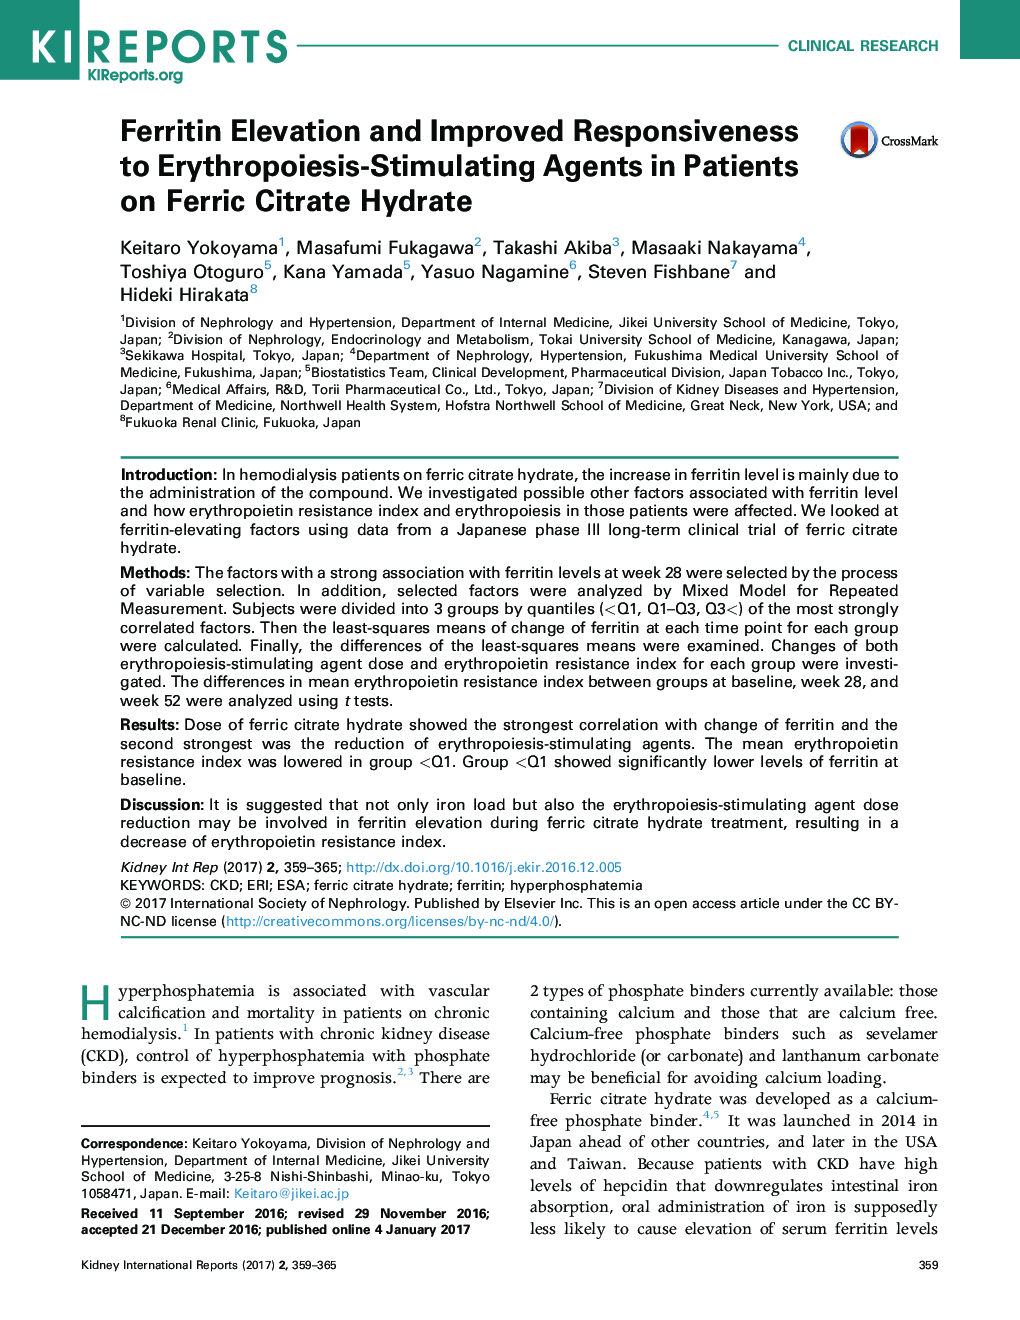 Ferritin Elevation and Improved Responsiveness to Erythropoiesis-Stimulating Agents inÂ Patients on Ferric Citrate Hydrate